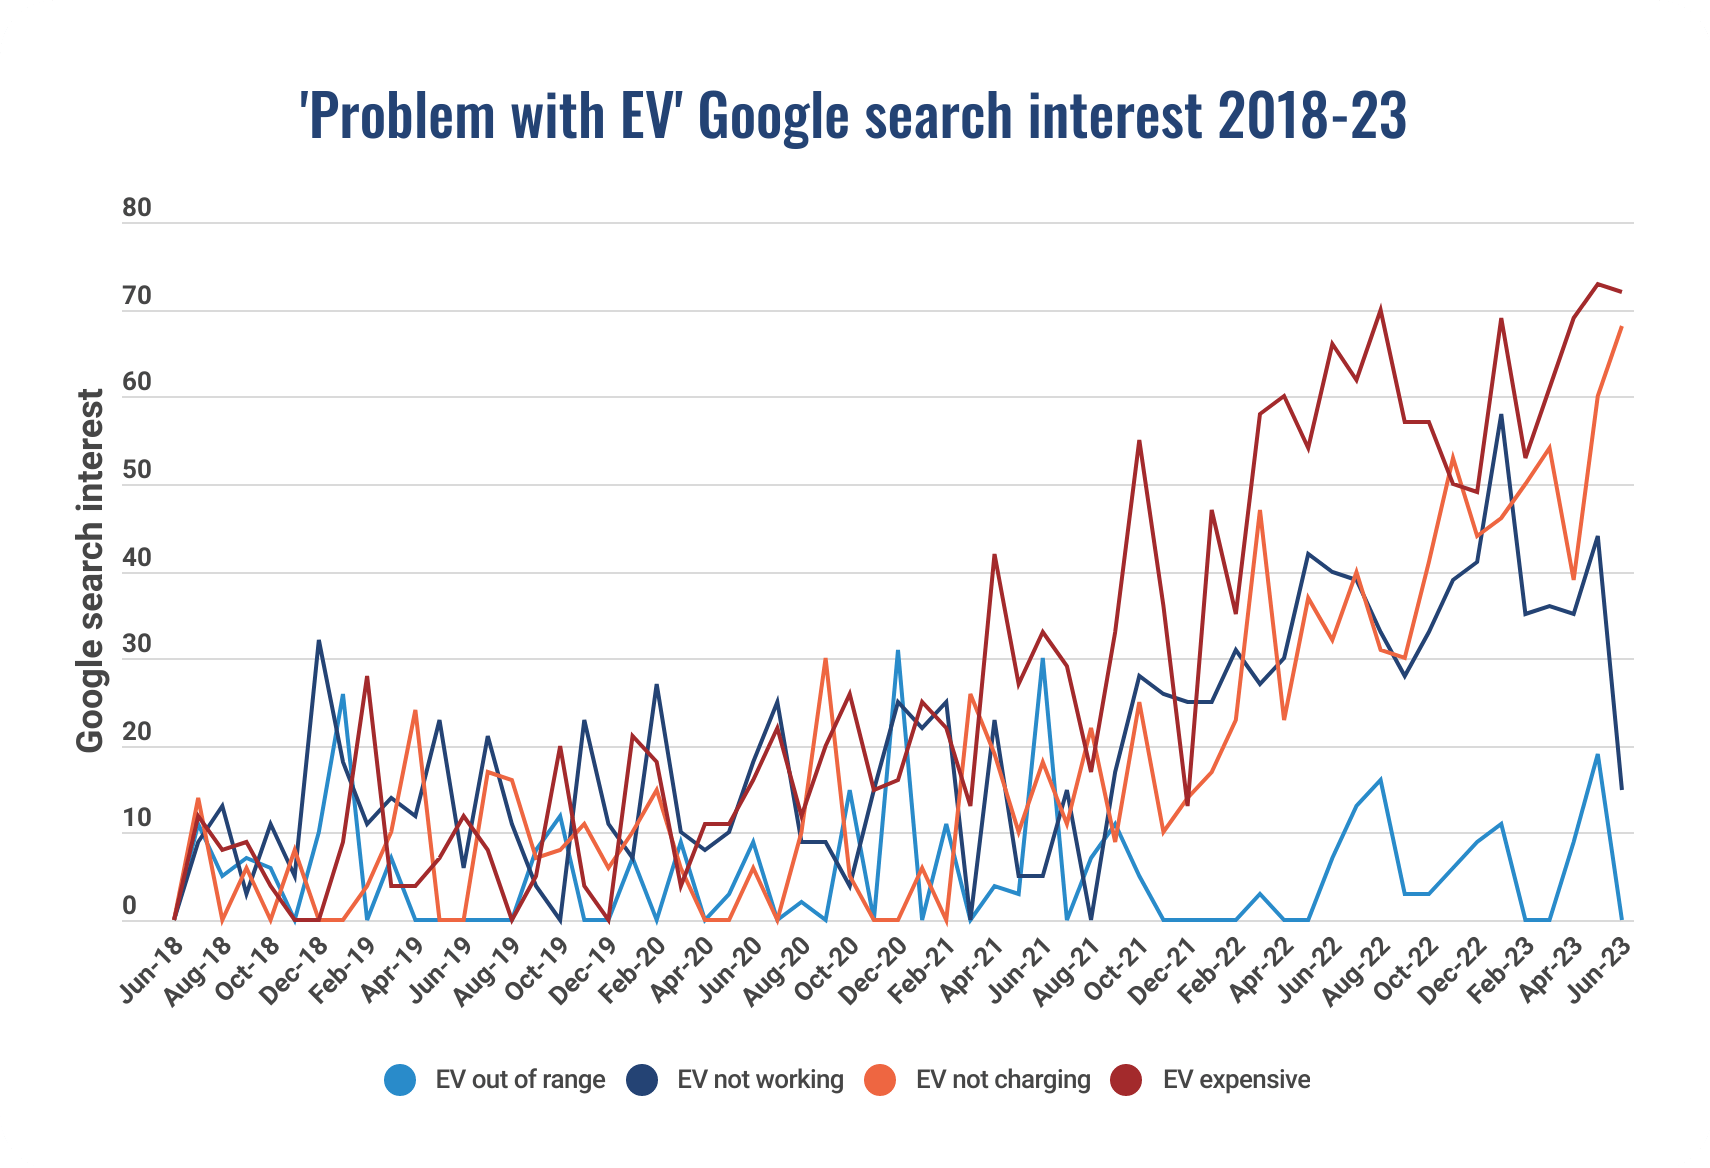 A line chart showcasing Google Trends data for search queries related to problems with EVs